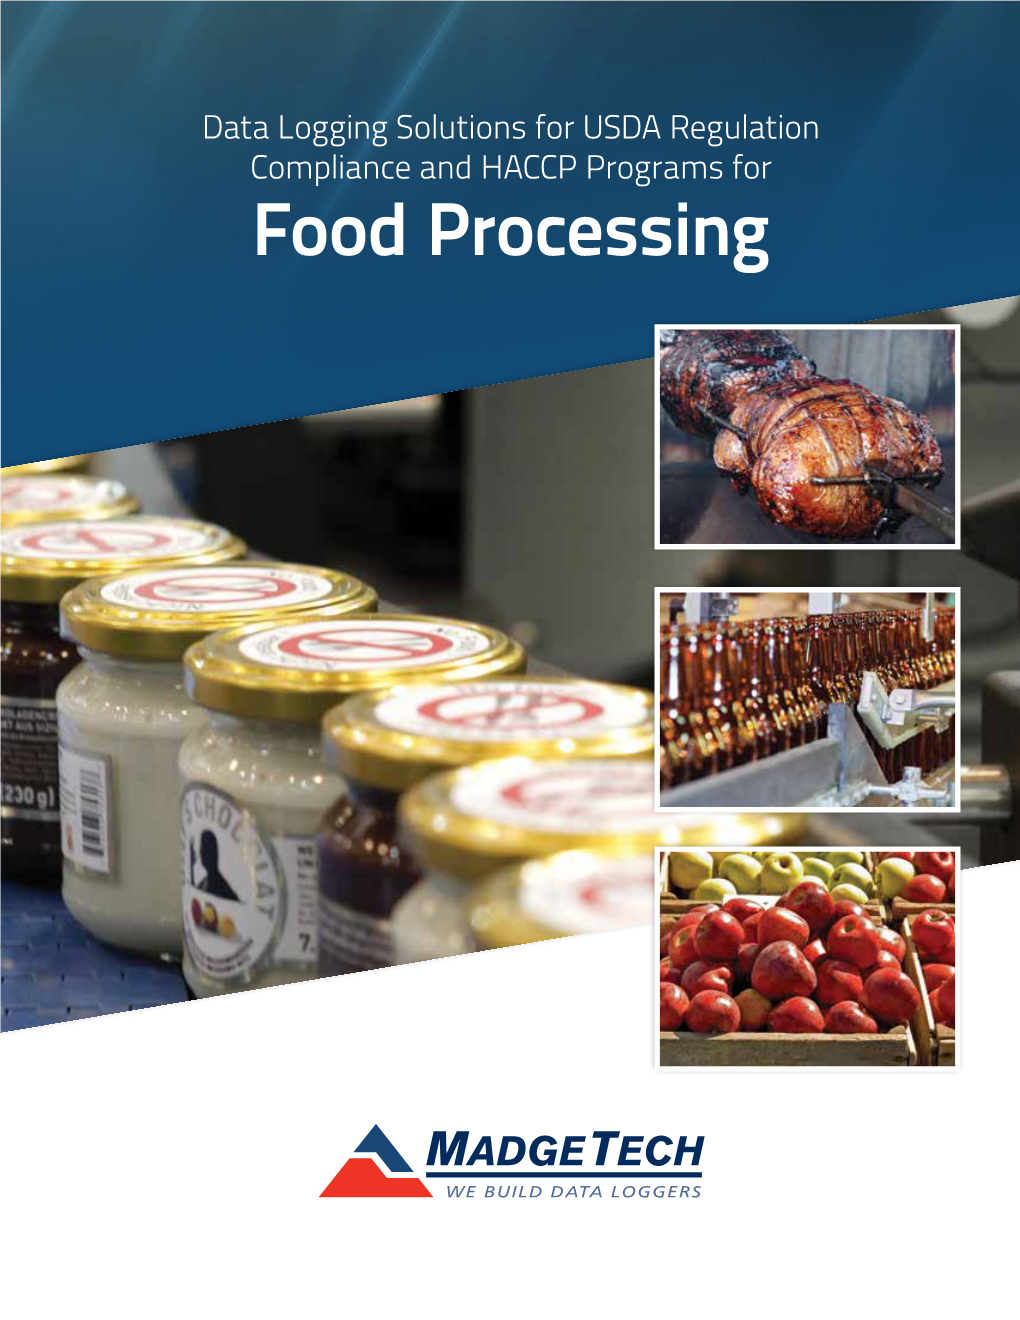 Food Processing Data Logging Solutions for Temperature Critical Food Processing Applications